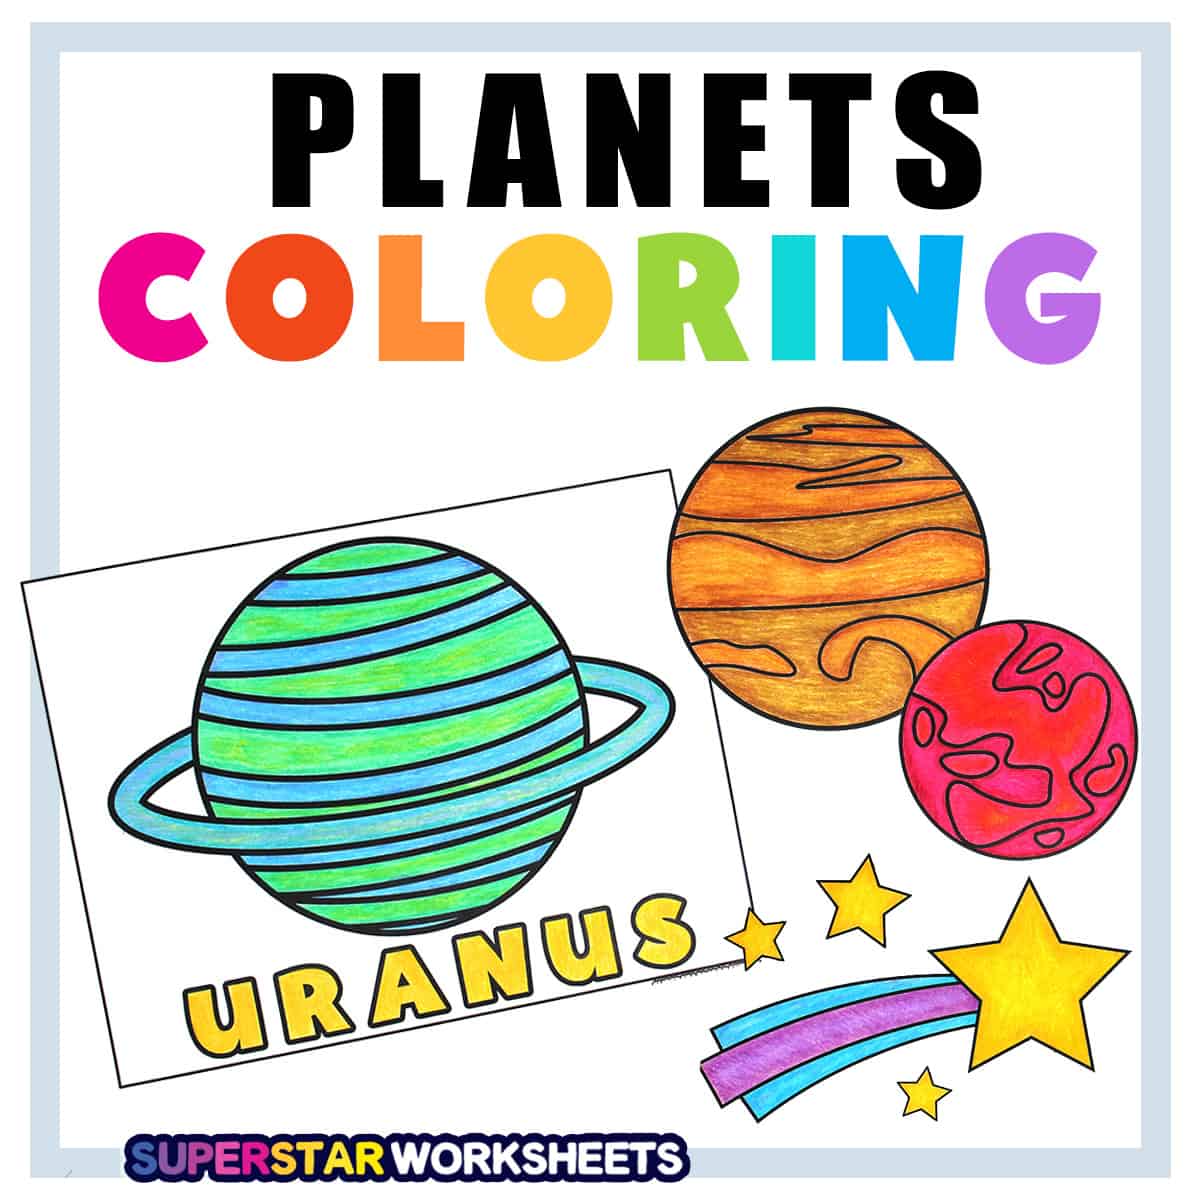 Planets coloring pages